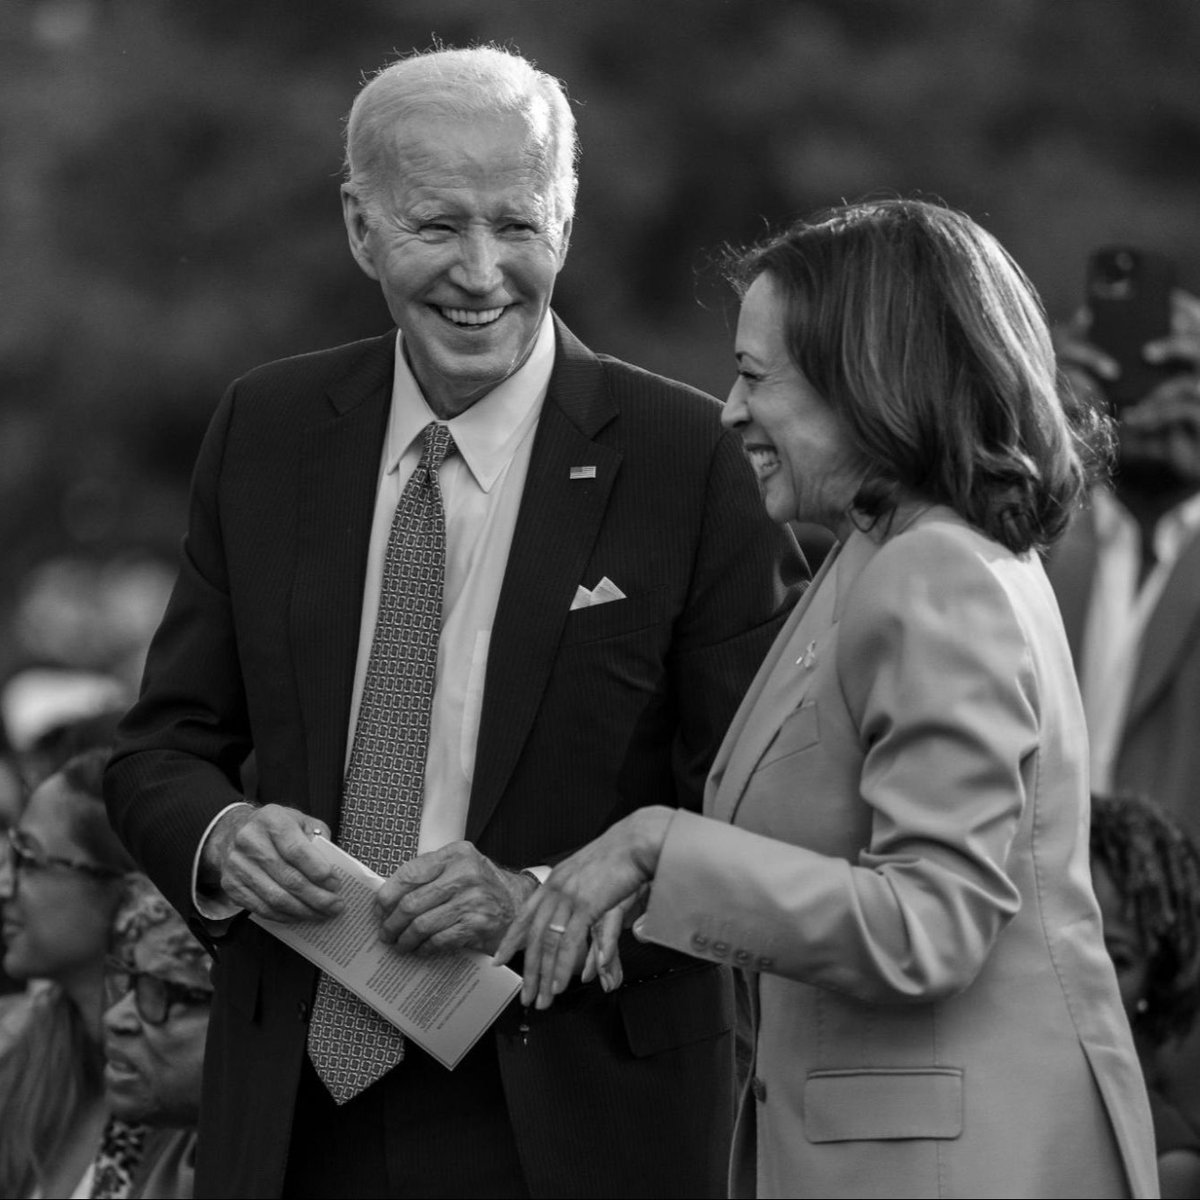 From becoming the first woman to serve as San Francisco’s district attorney, to California’s attorney general, and now serving as vice president—@KamalaHarris has shattered barriers. I’m proud to have her on my team.